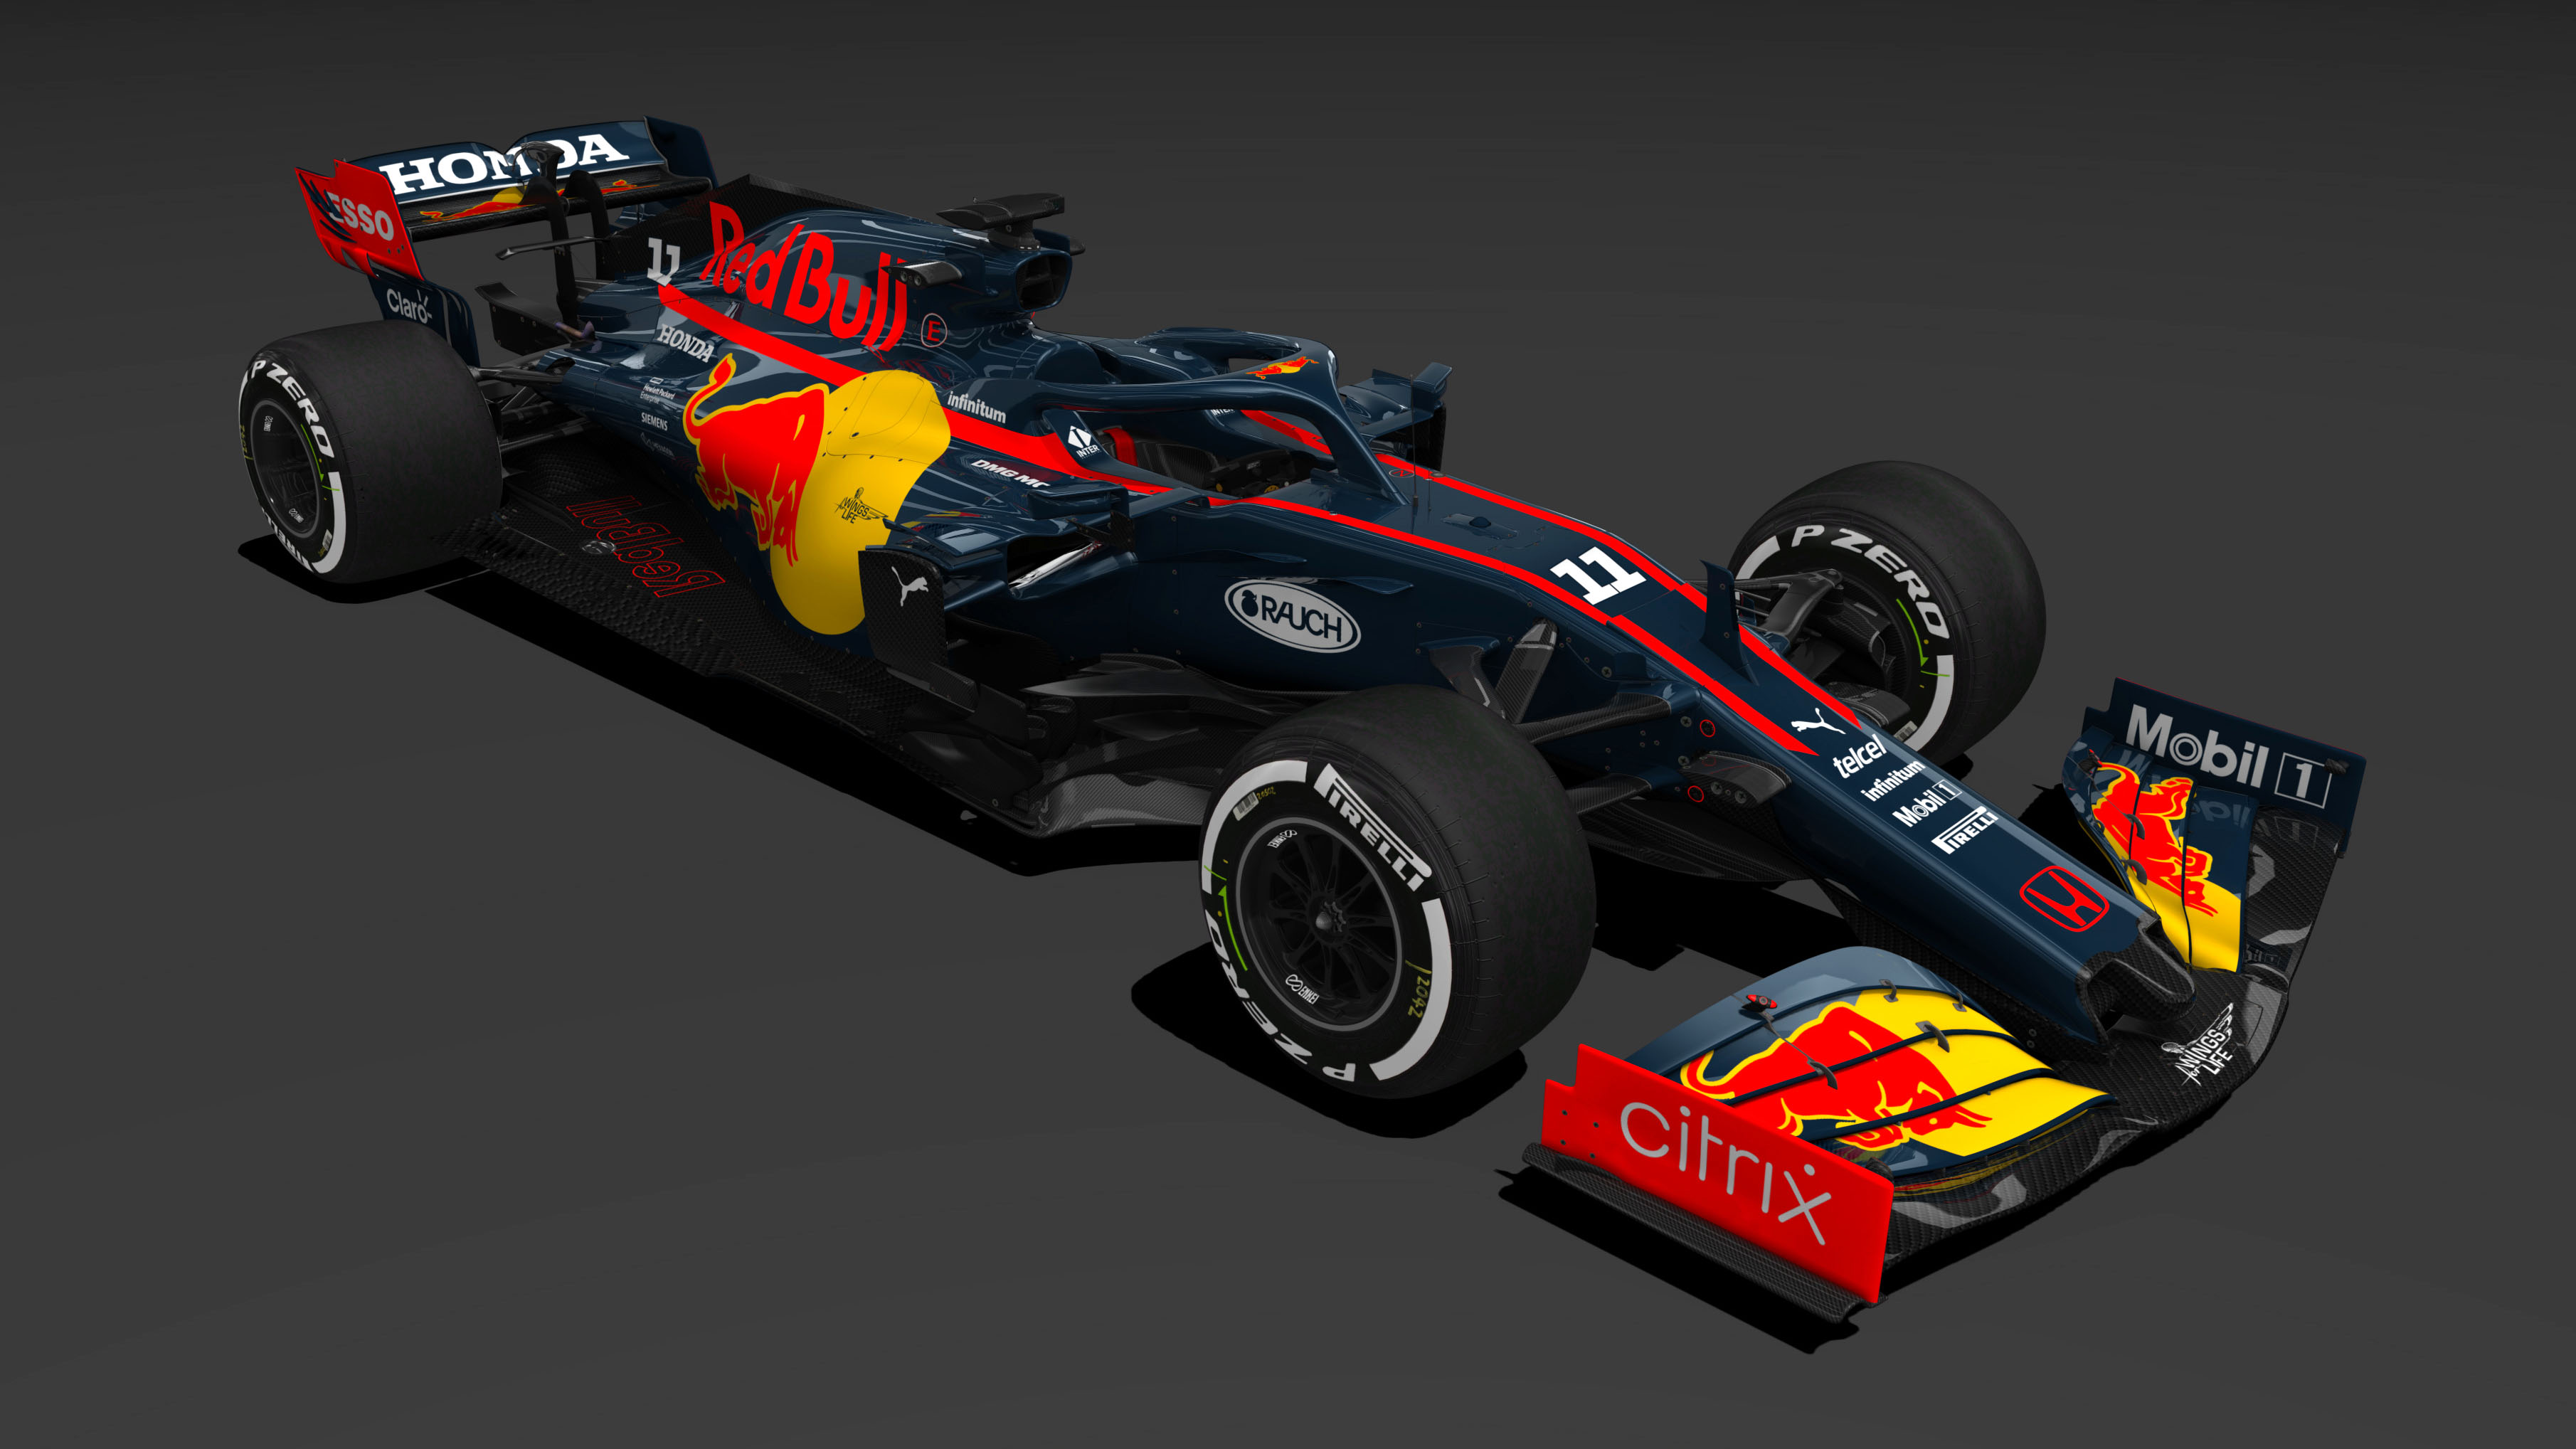 2021 Bull Formula 1 Livery - Tommo RaceDepartment